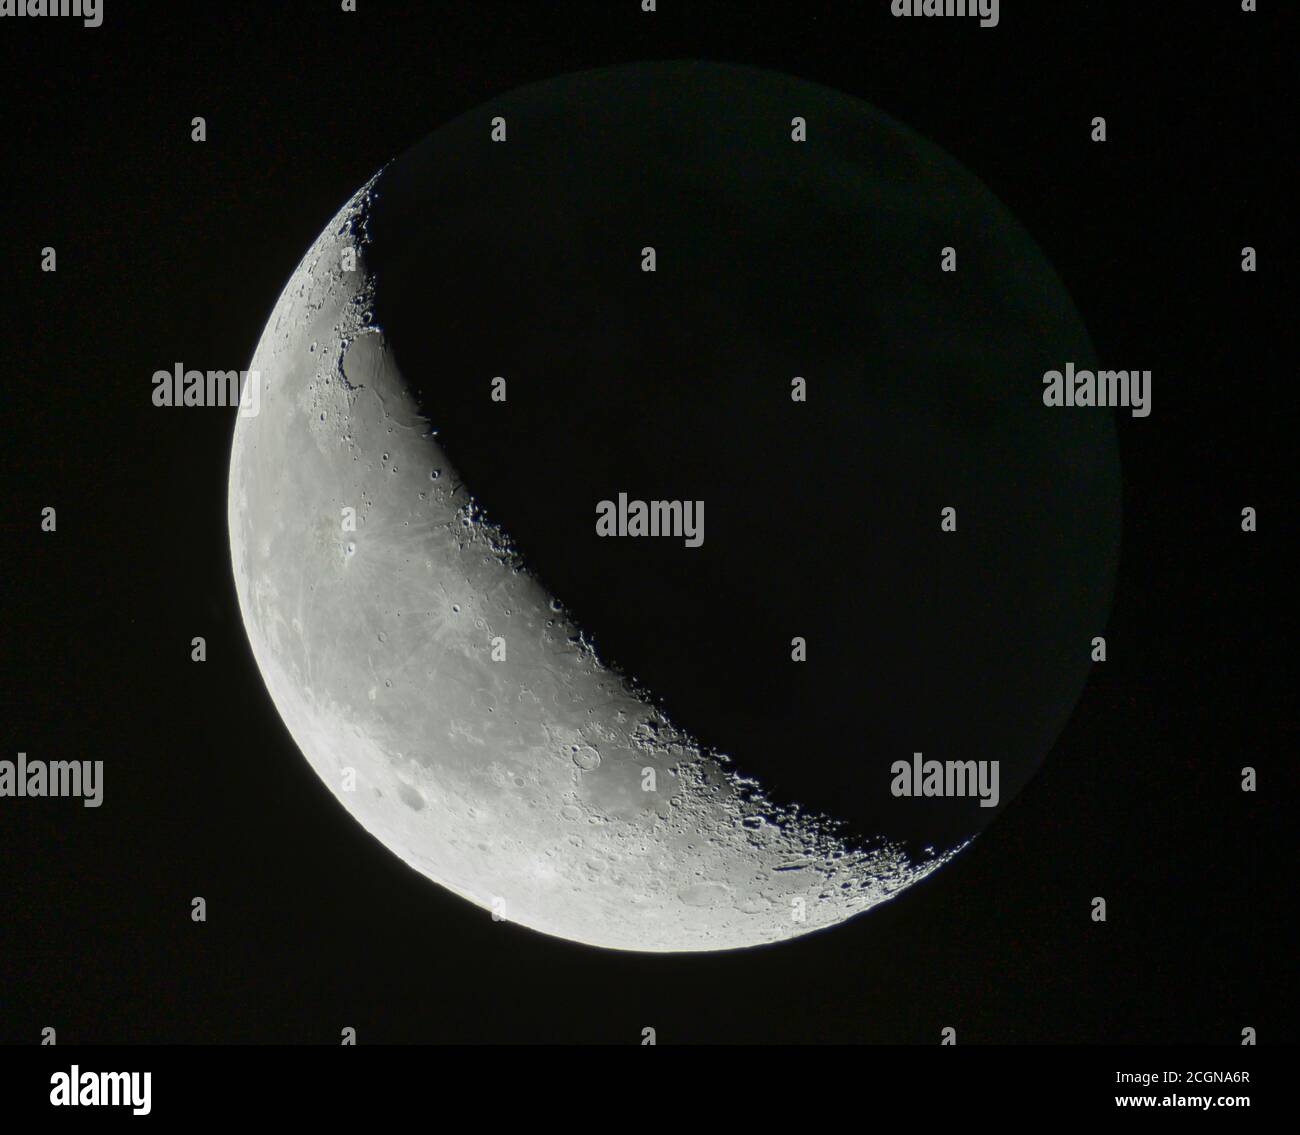 London, UK. 12 September 2020. 39% illuminated waning crescent Moon, photographed in the early hours of 12th September with western limb facing to left. Credit: Malcolm Park/Alamy Live News. Stock Photo